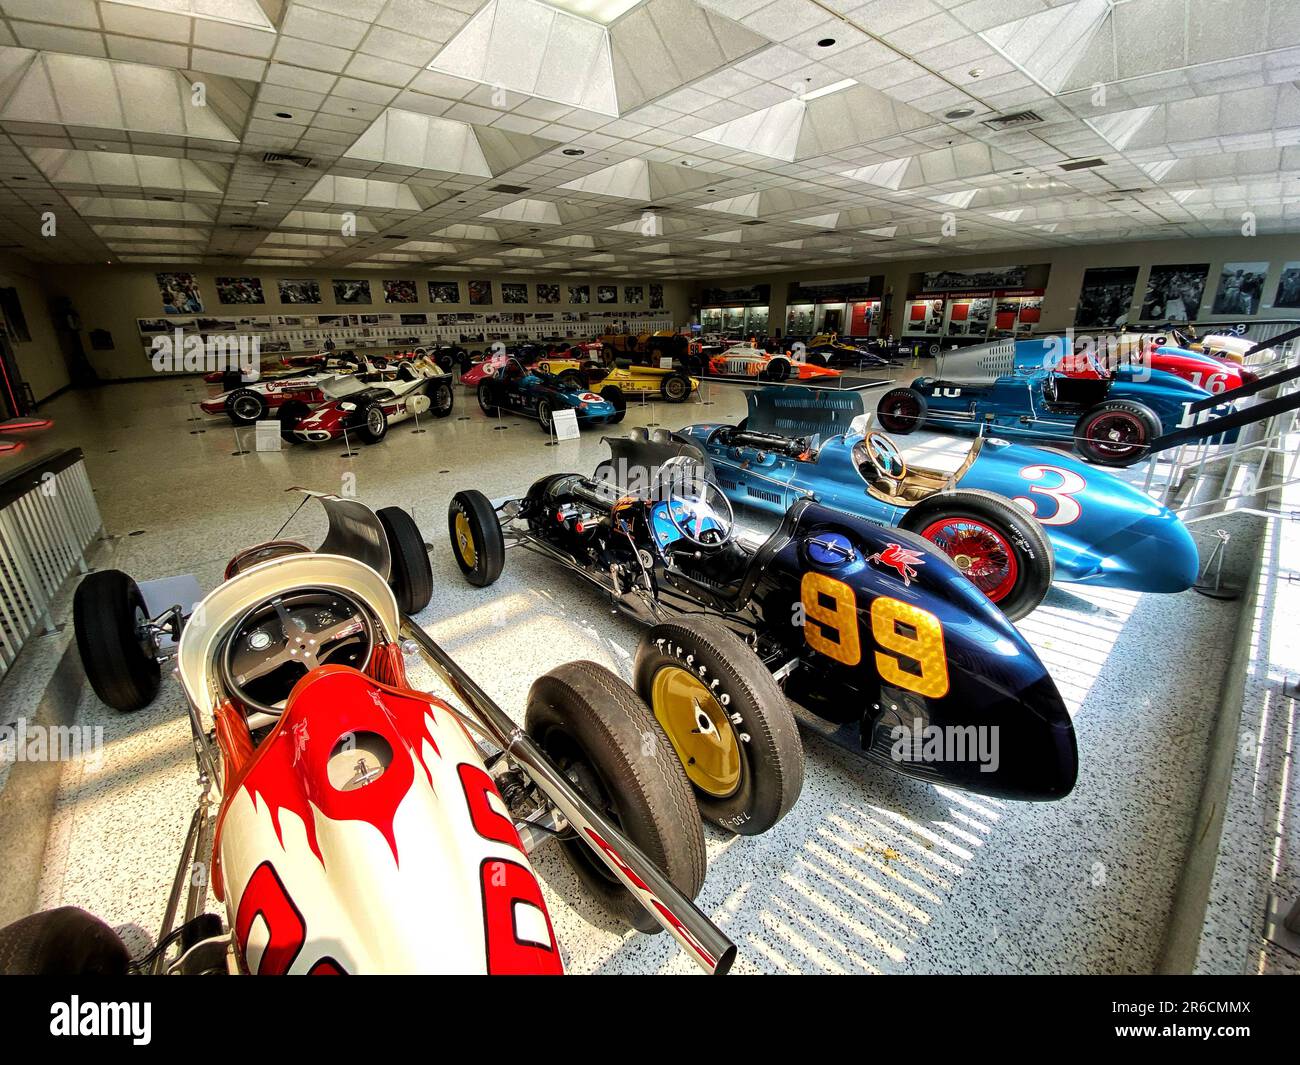 The Indianapolis Motor Speedway Museum. Dozens of vintage and historical race cars on display in the museum in Indianapolis, Indiana, USA. Stock Photo